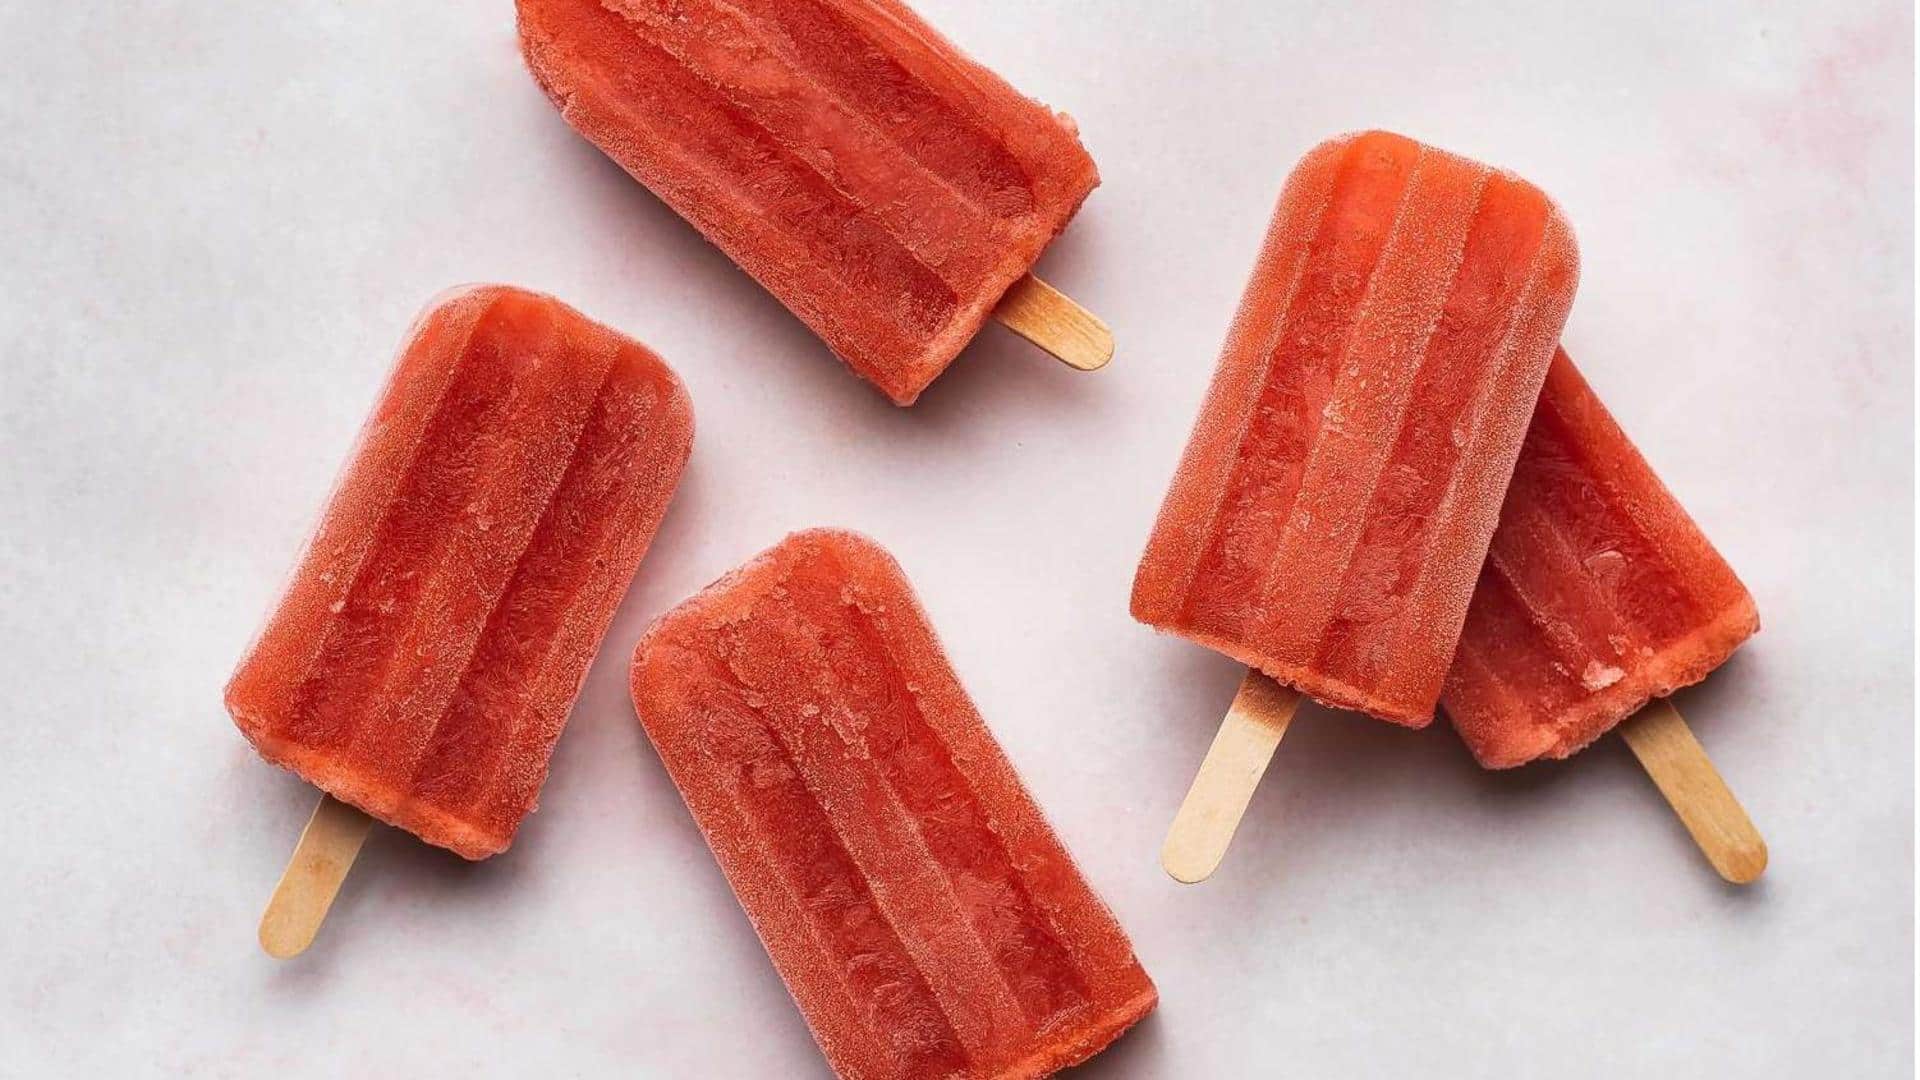 Beat the heat with these healthy popsicle recipes